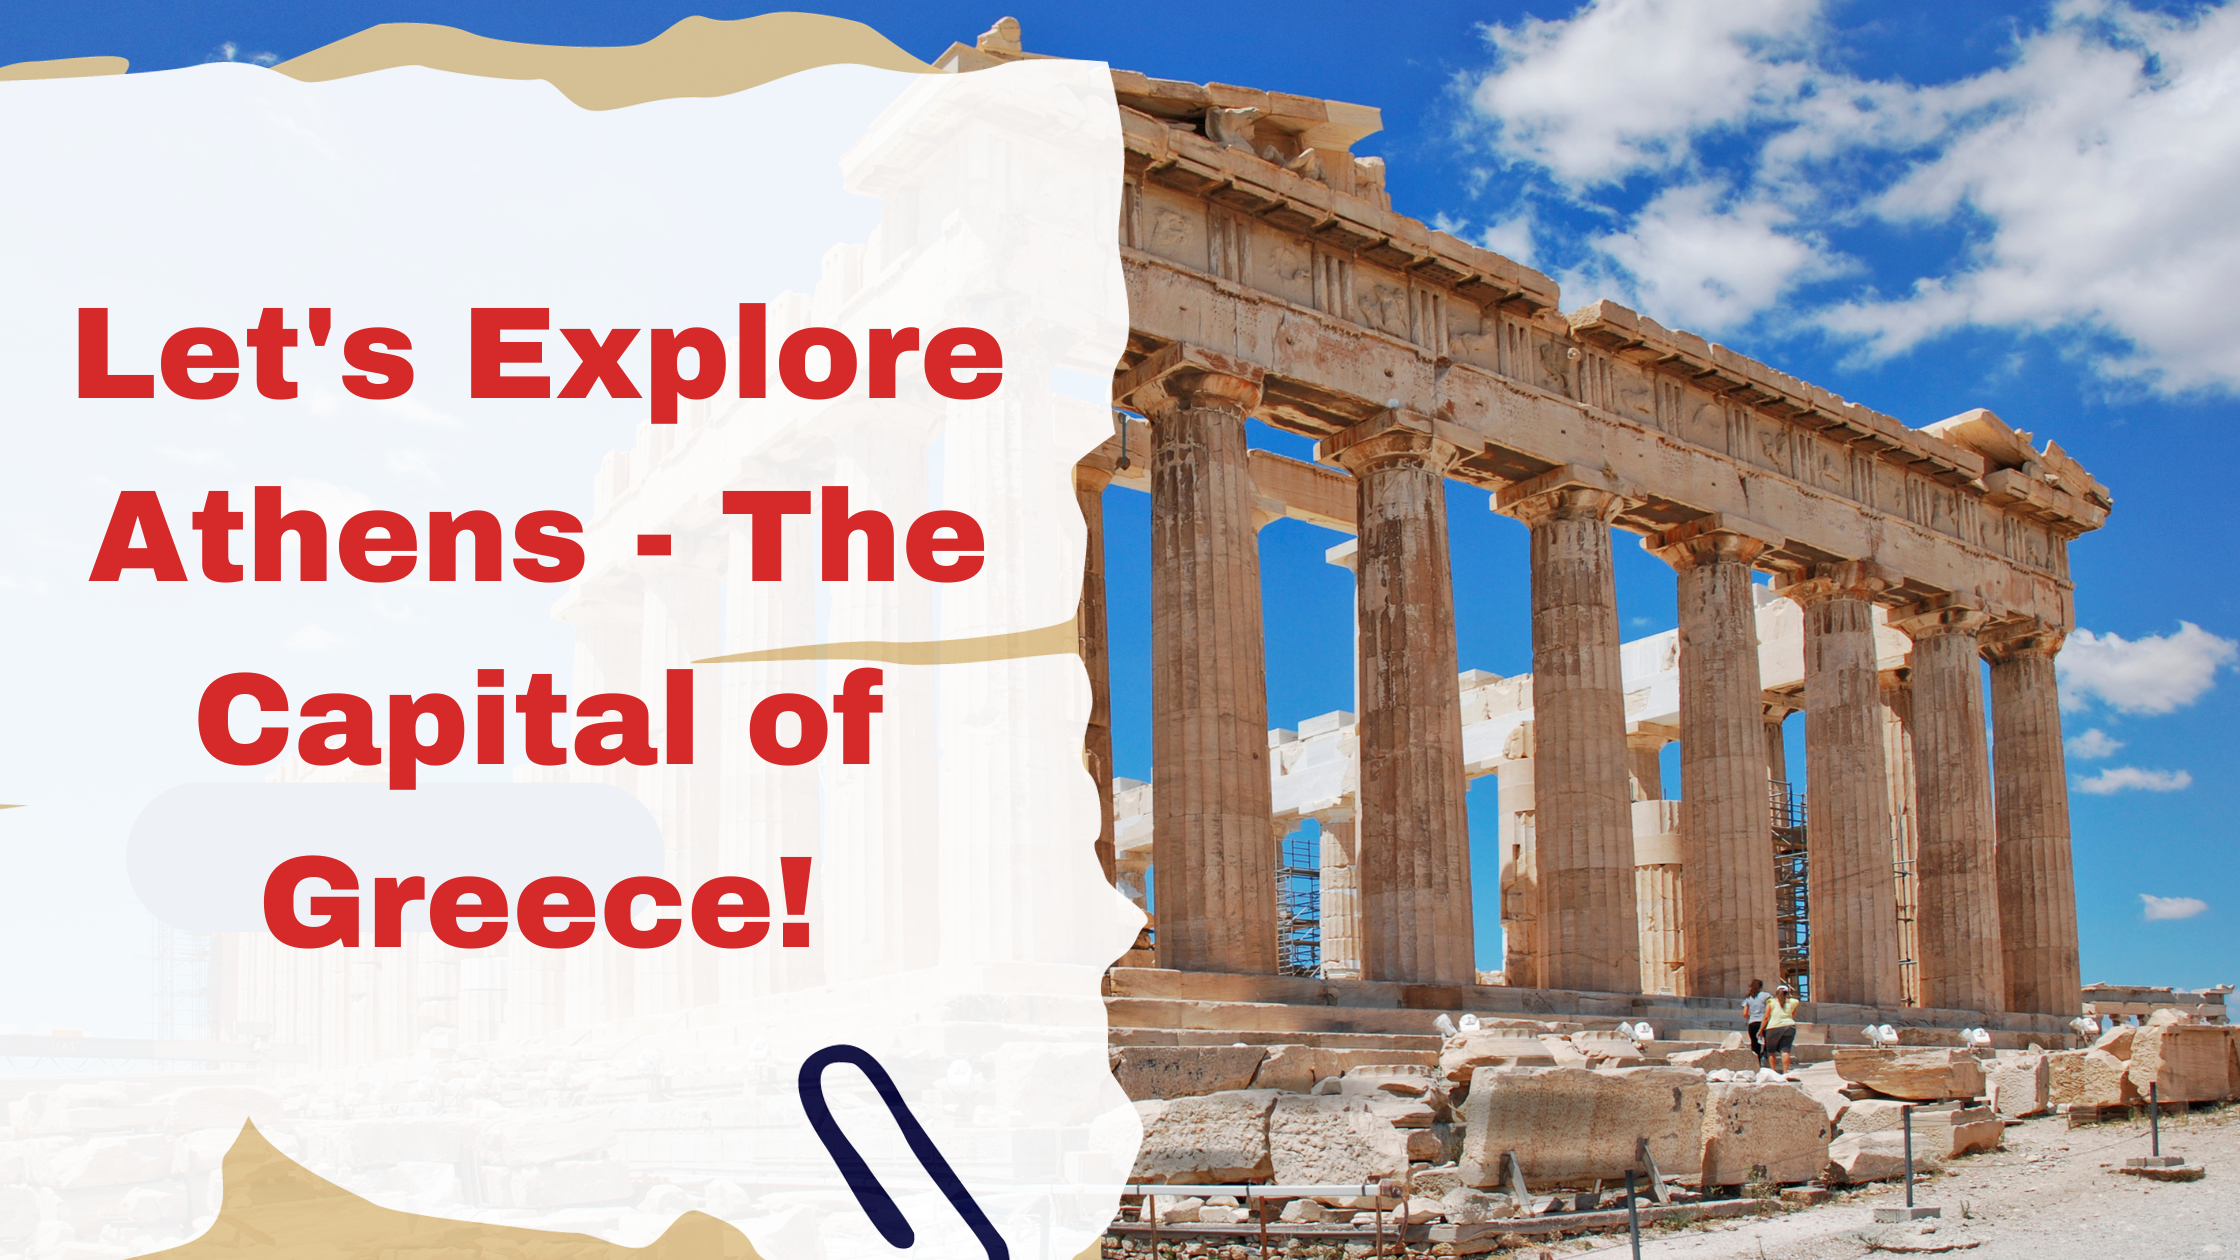 Let's Explore Athens - The Capital of Greece